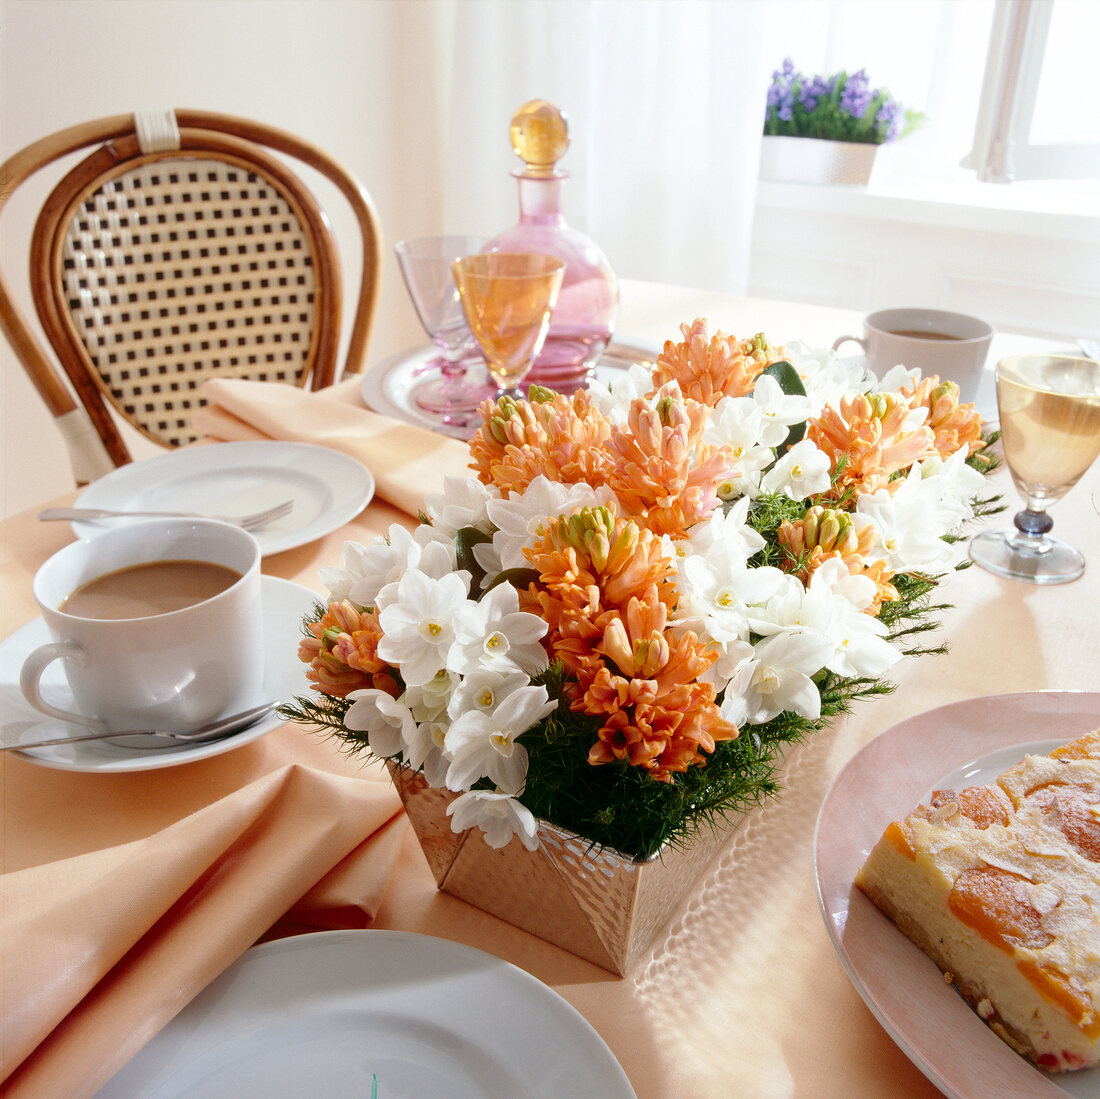 Flower arrangements in baking dish with orange and white flowers on laid table